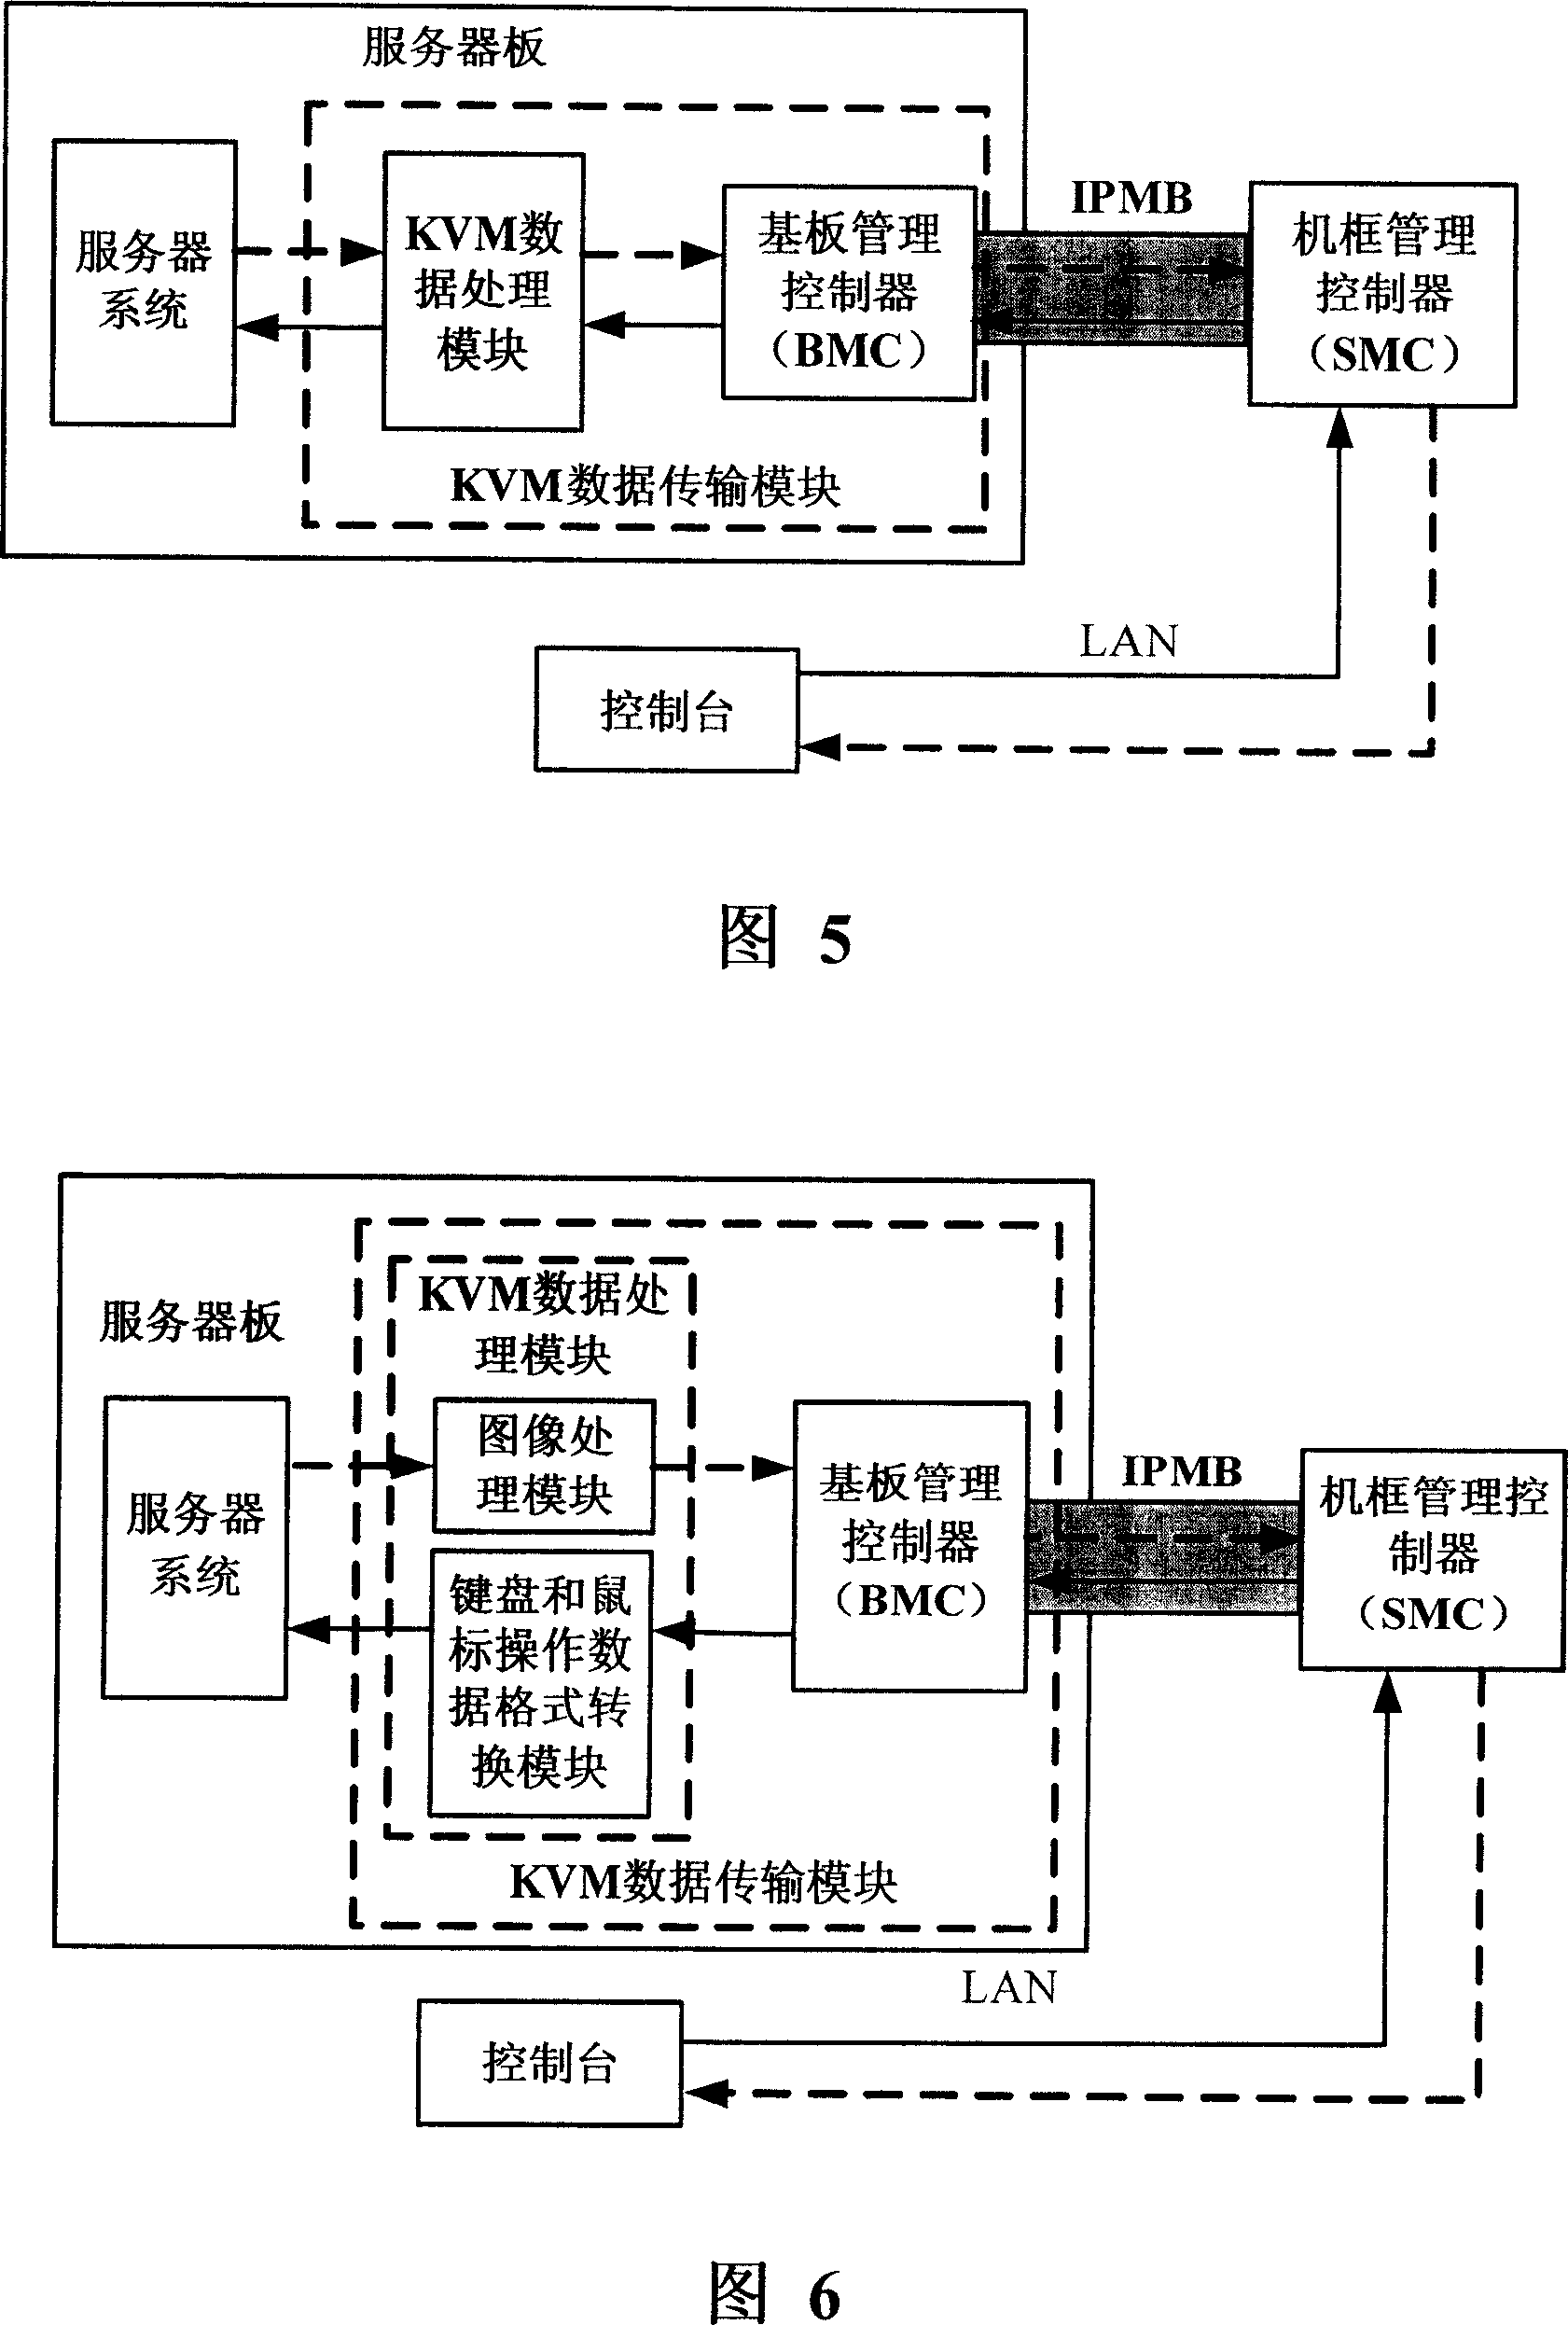 System for managing high-level telecommunication computing construction frame and server long-distance control